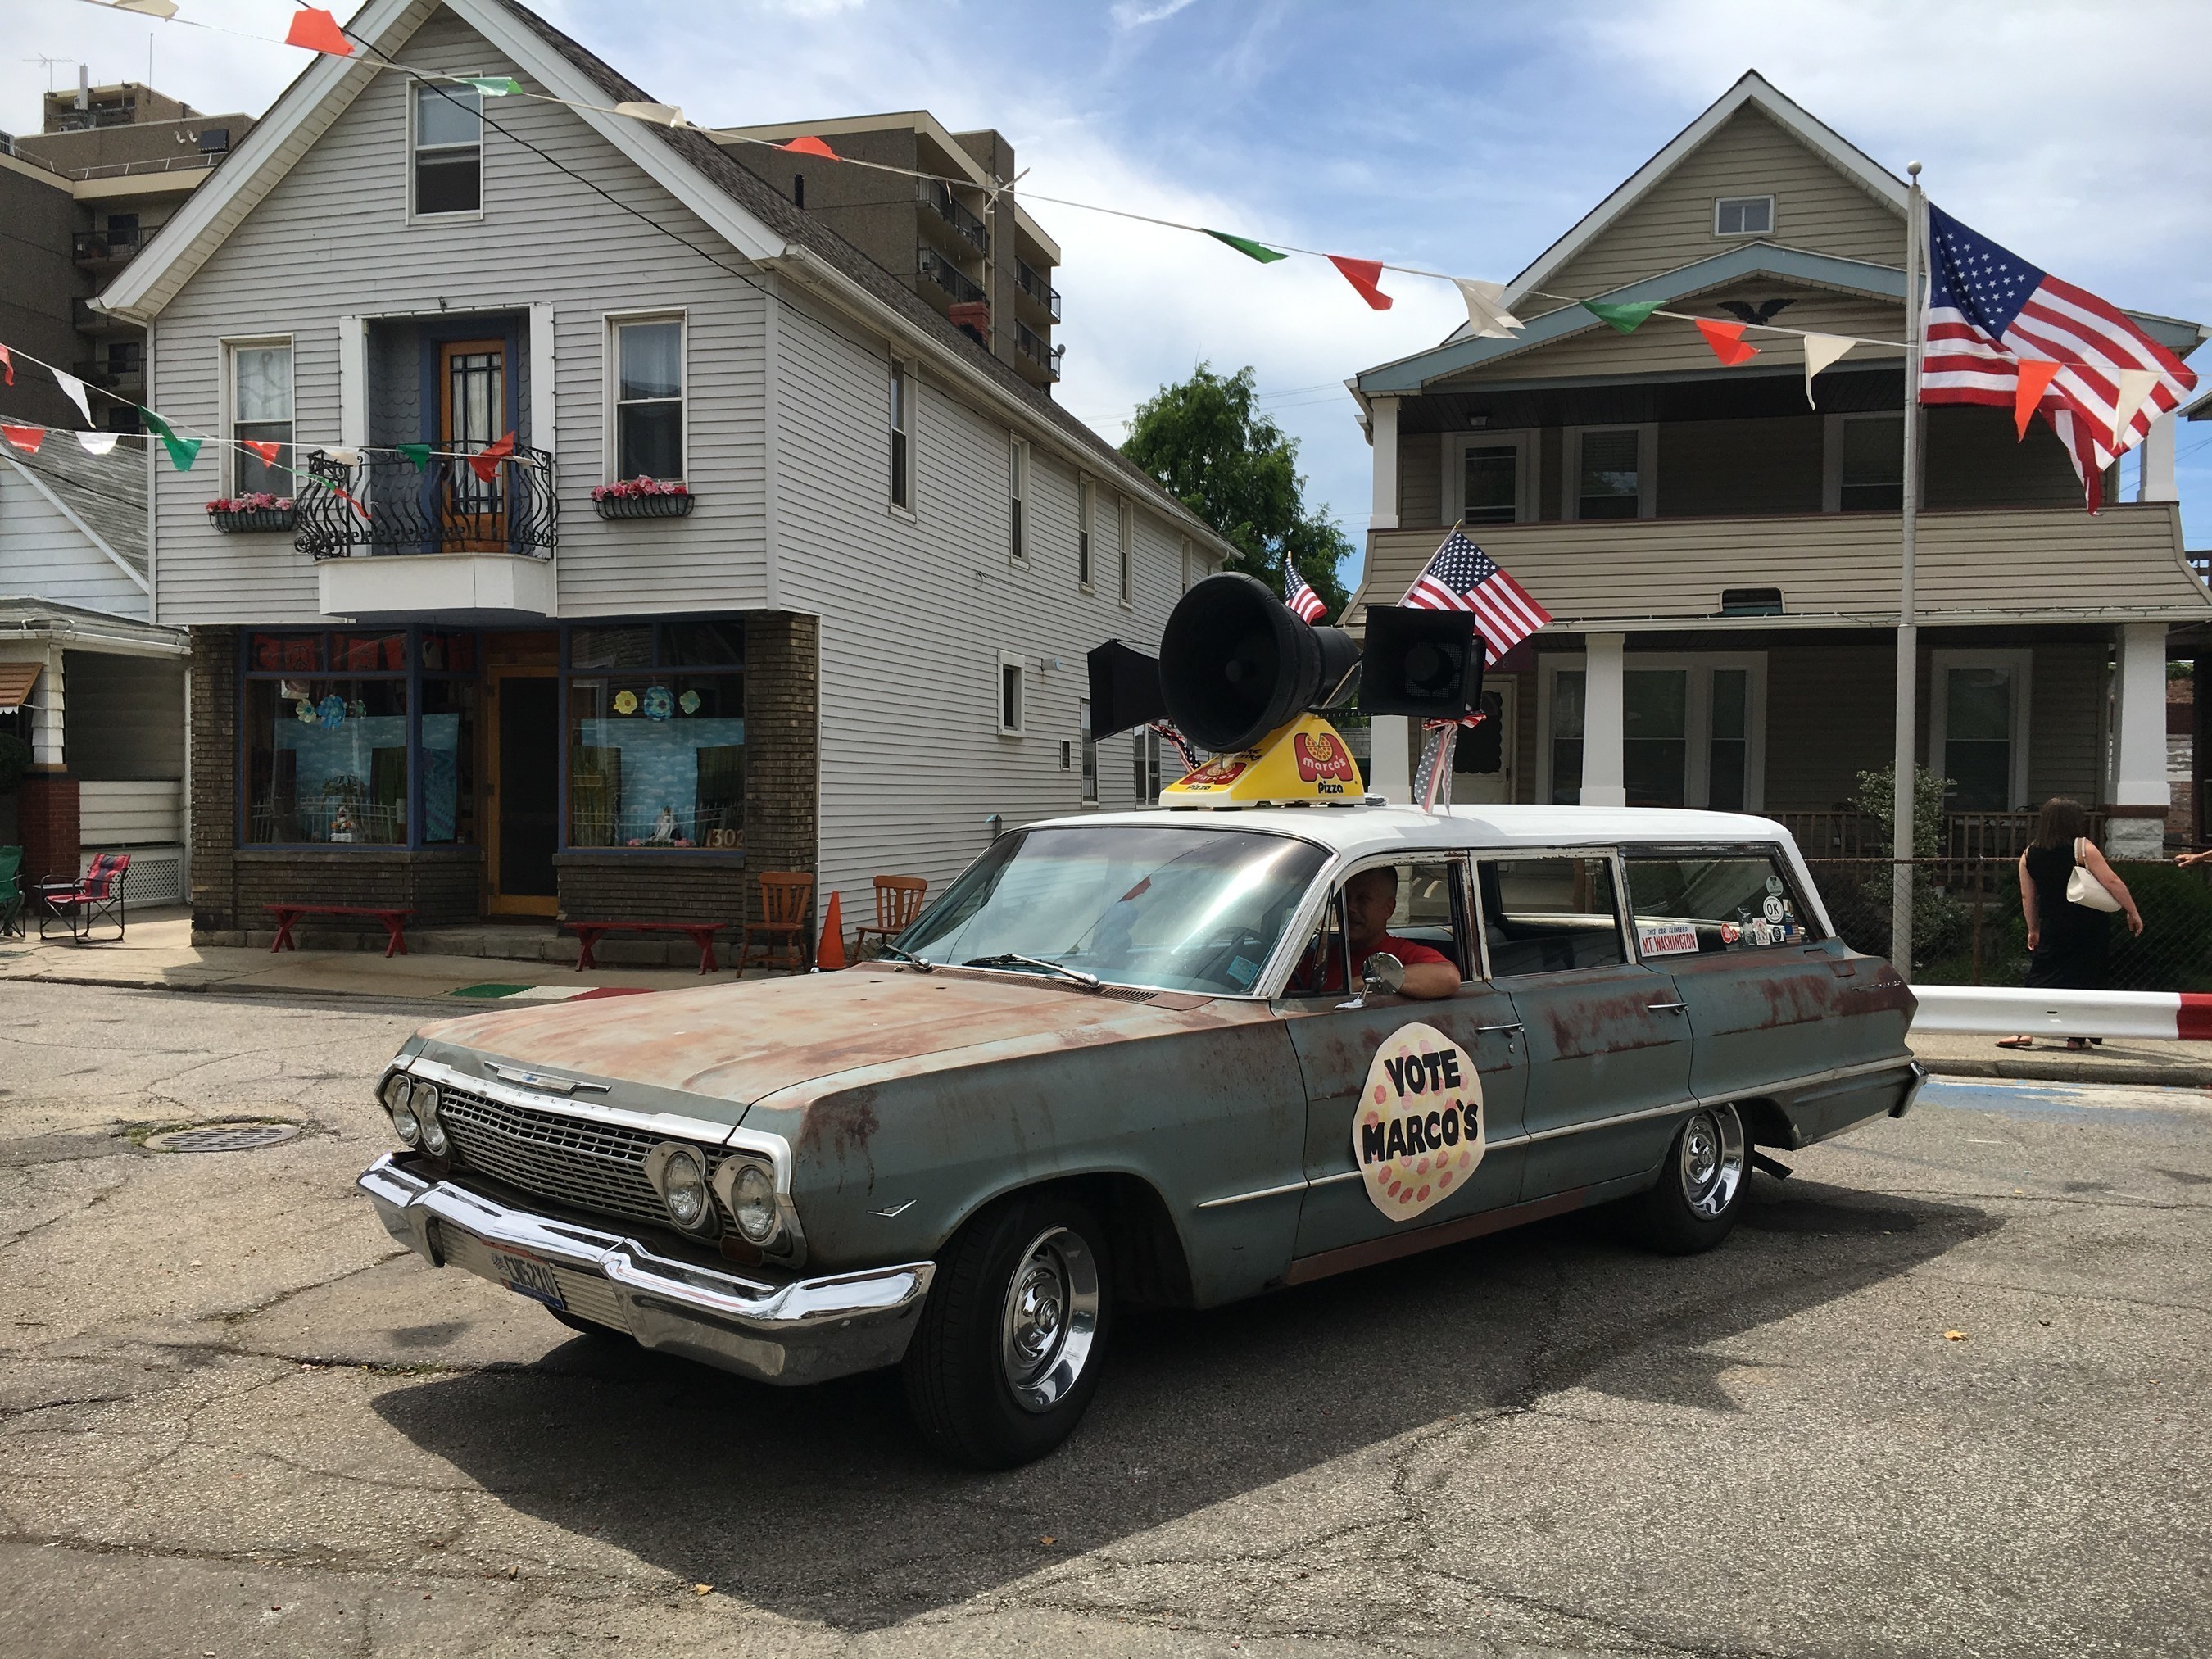 Marco's Pizza is out to be elected America's Pizza. To kickoff its campaign, it took to the streets of Cleveland during the RNC in a retro campaign vehicle complete with rooftop speakers.